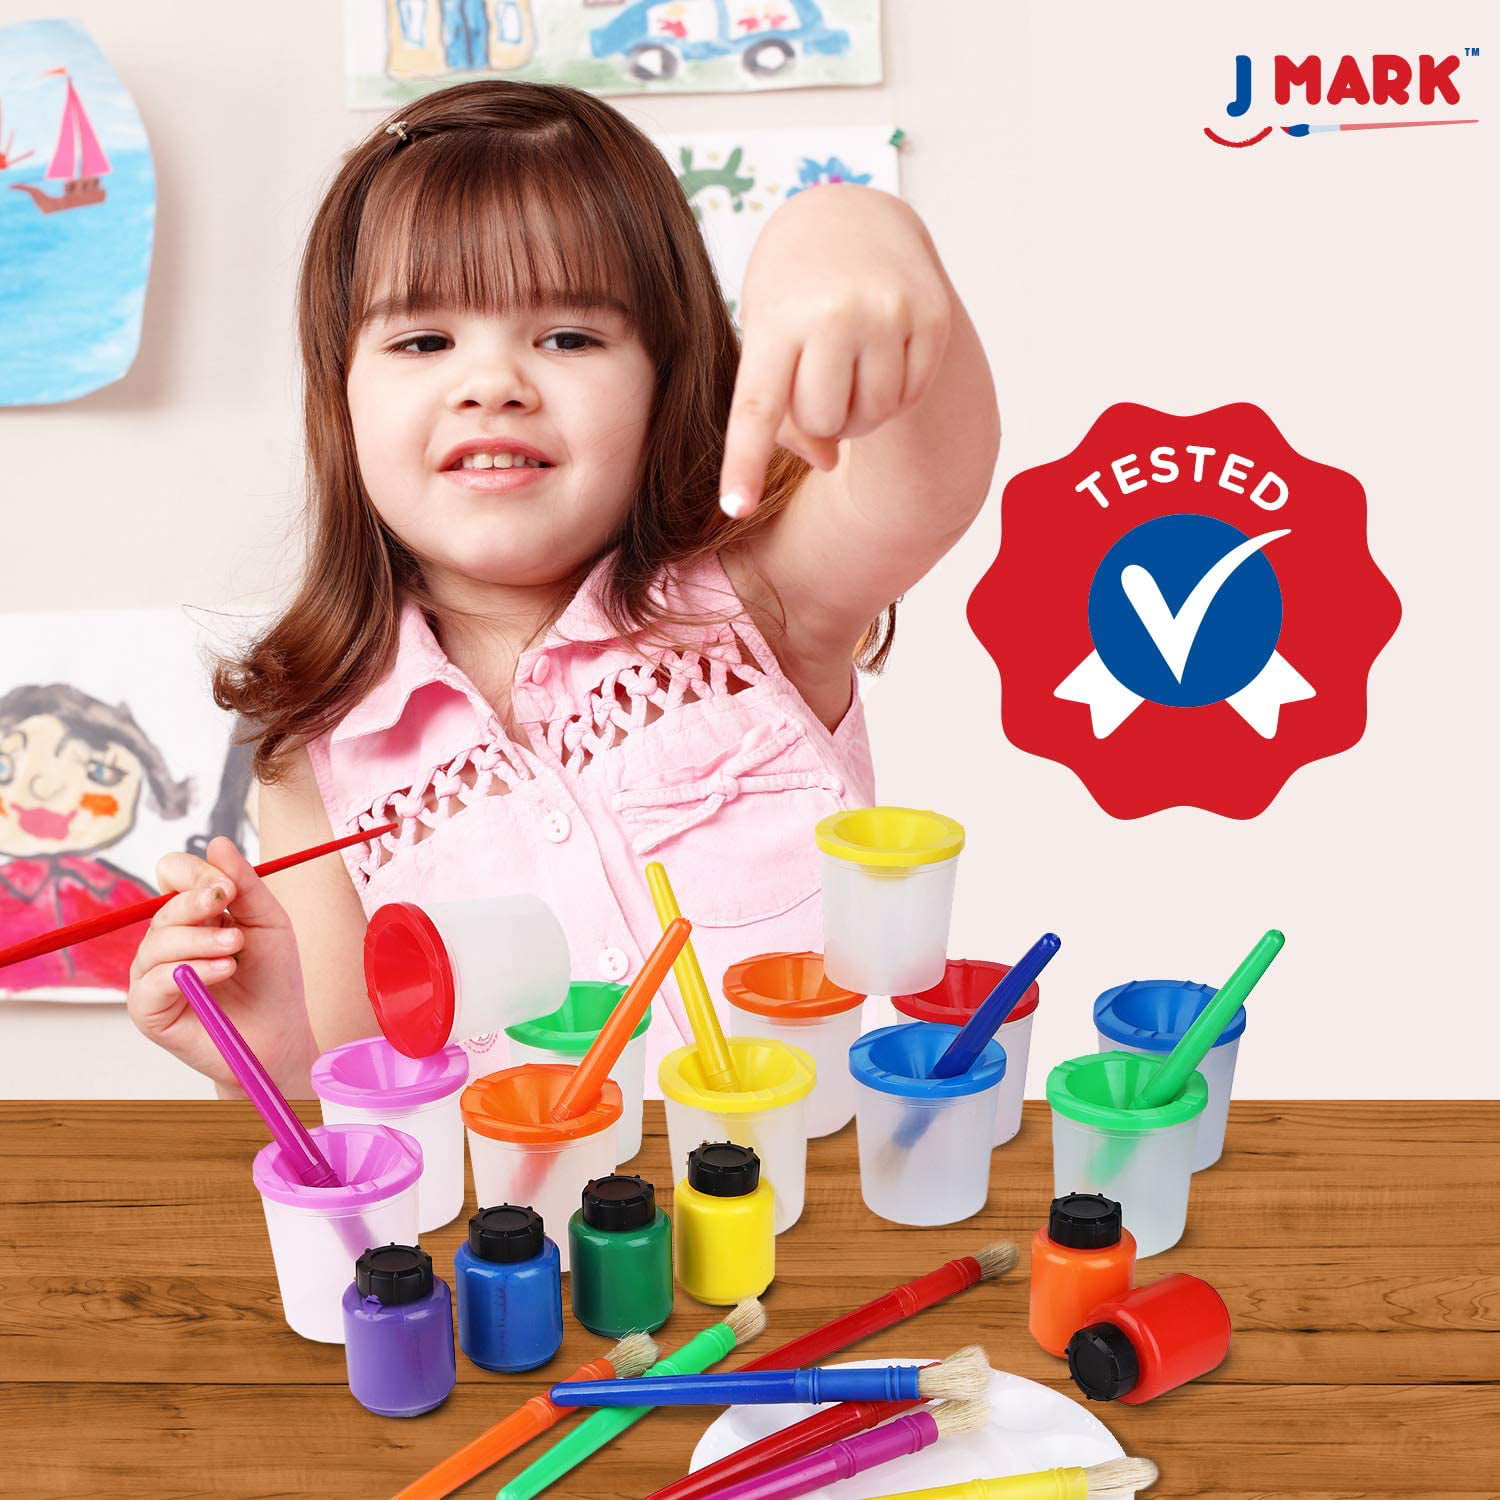 J MARK Toddler Painting Set - 32-Piece All Inclusive with Spill Proof Paint  Cups, Smock, Washable Tempera Paint, Brushes and Mixing - Toddler Paint Set  - Safe